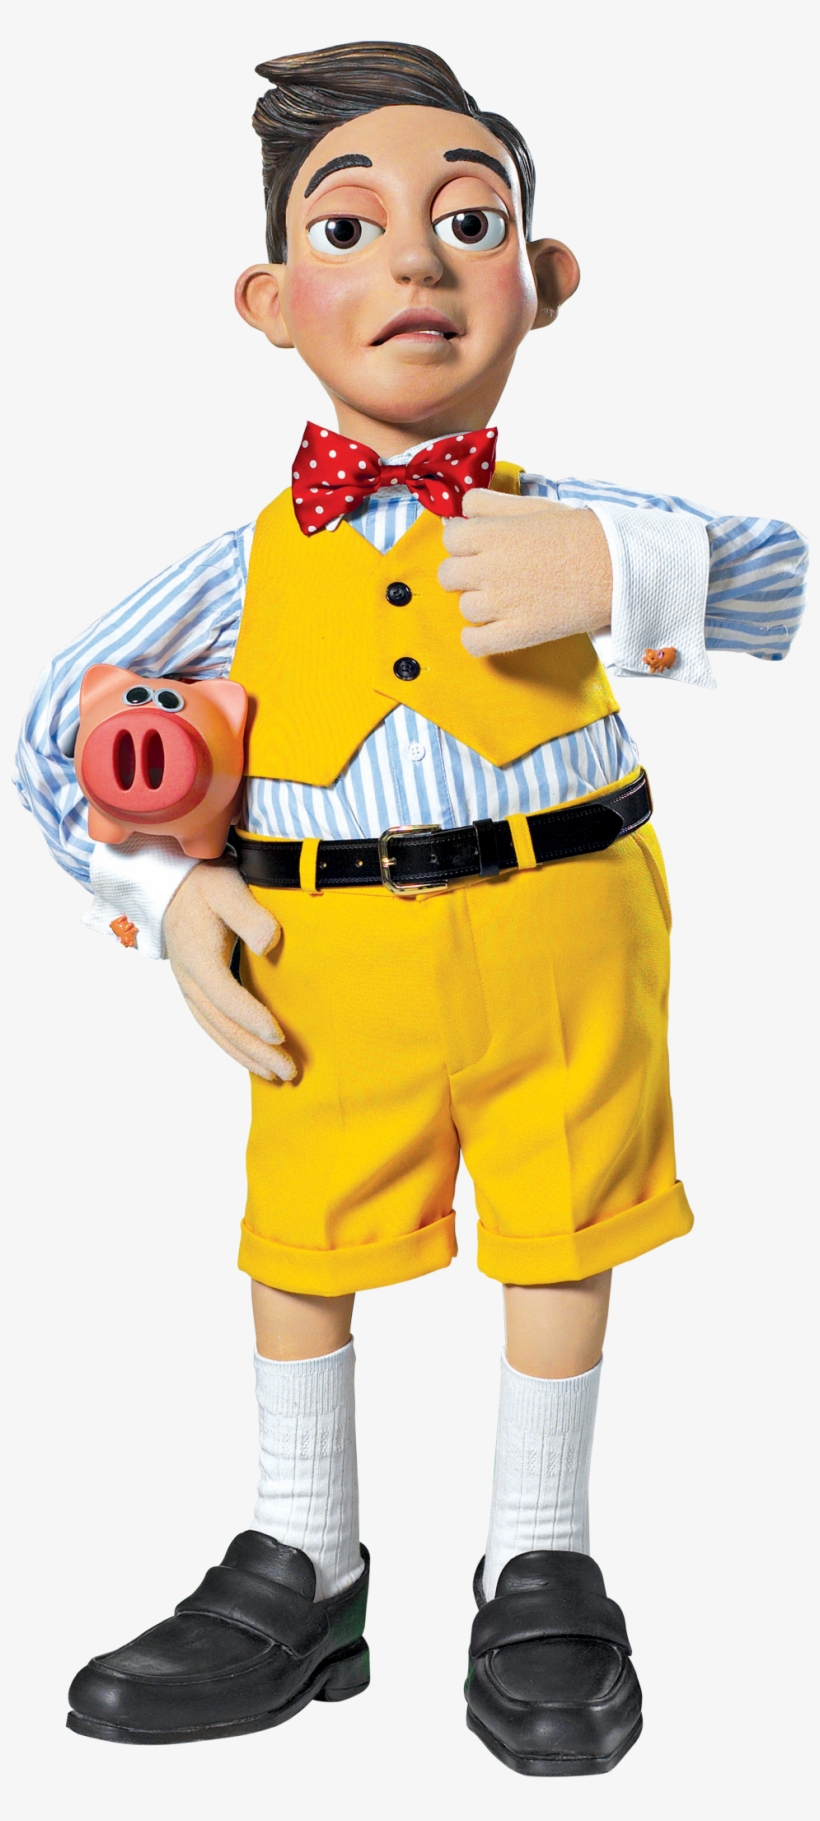 425-4254757_lazytown-stingy-2-lazy-town-stingy-png.png